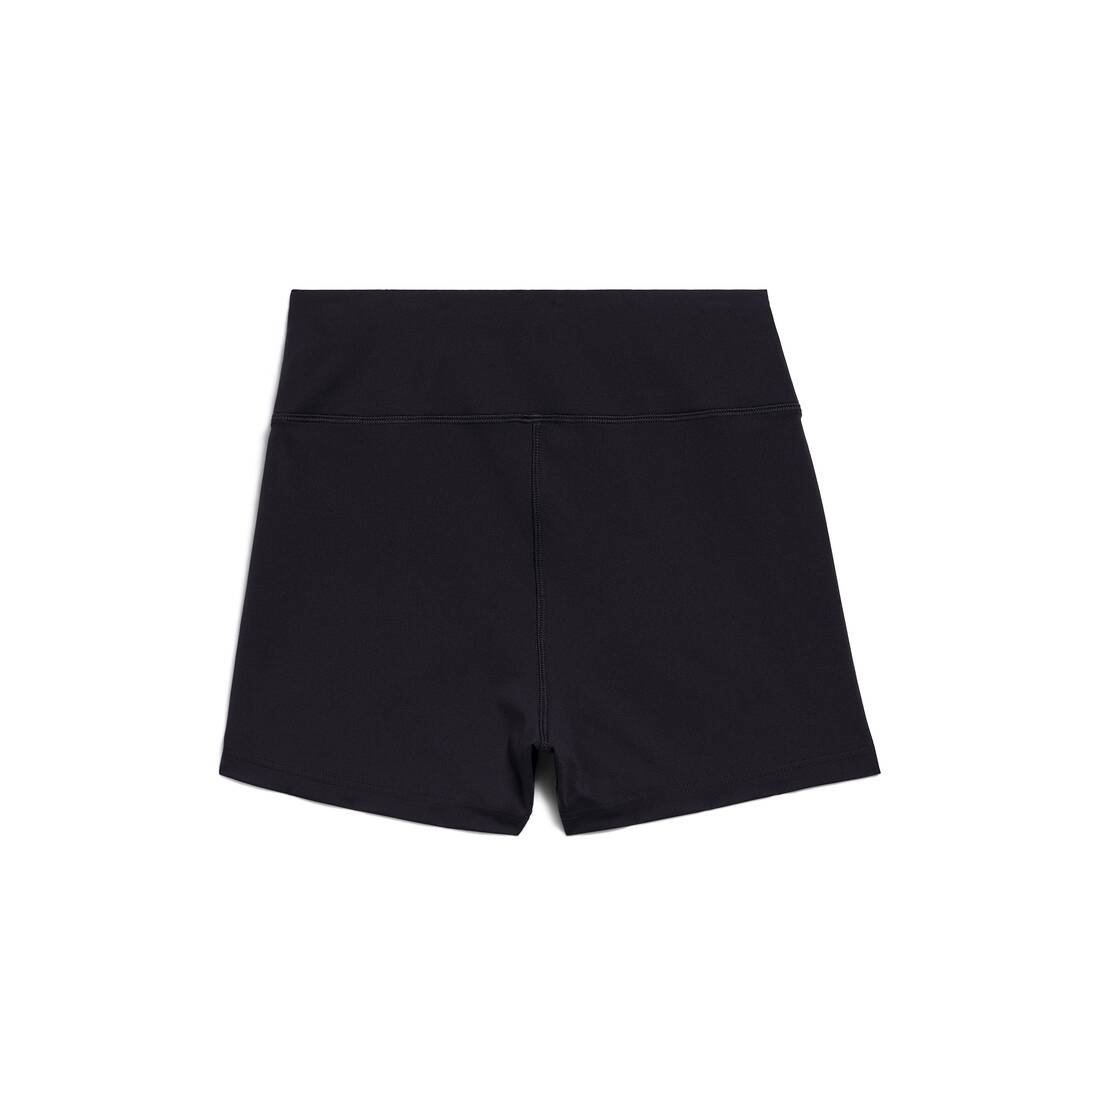 Women's Activewear Cycling Shorts in Black - 5